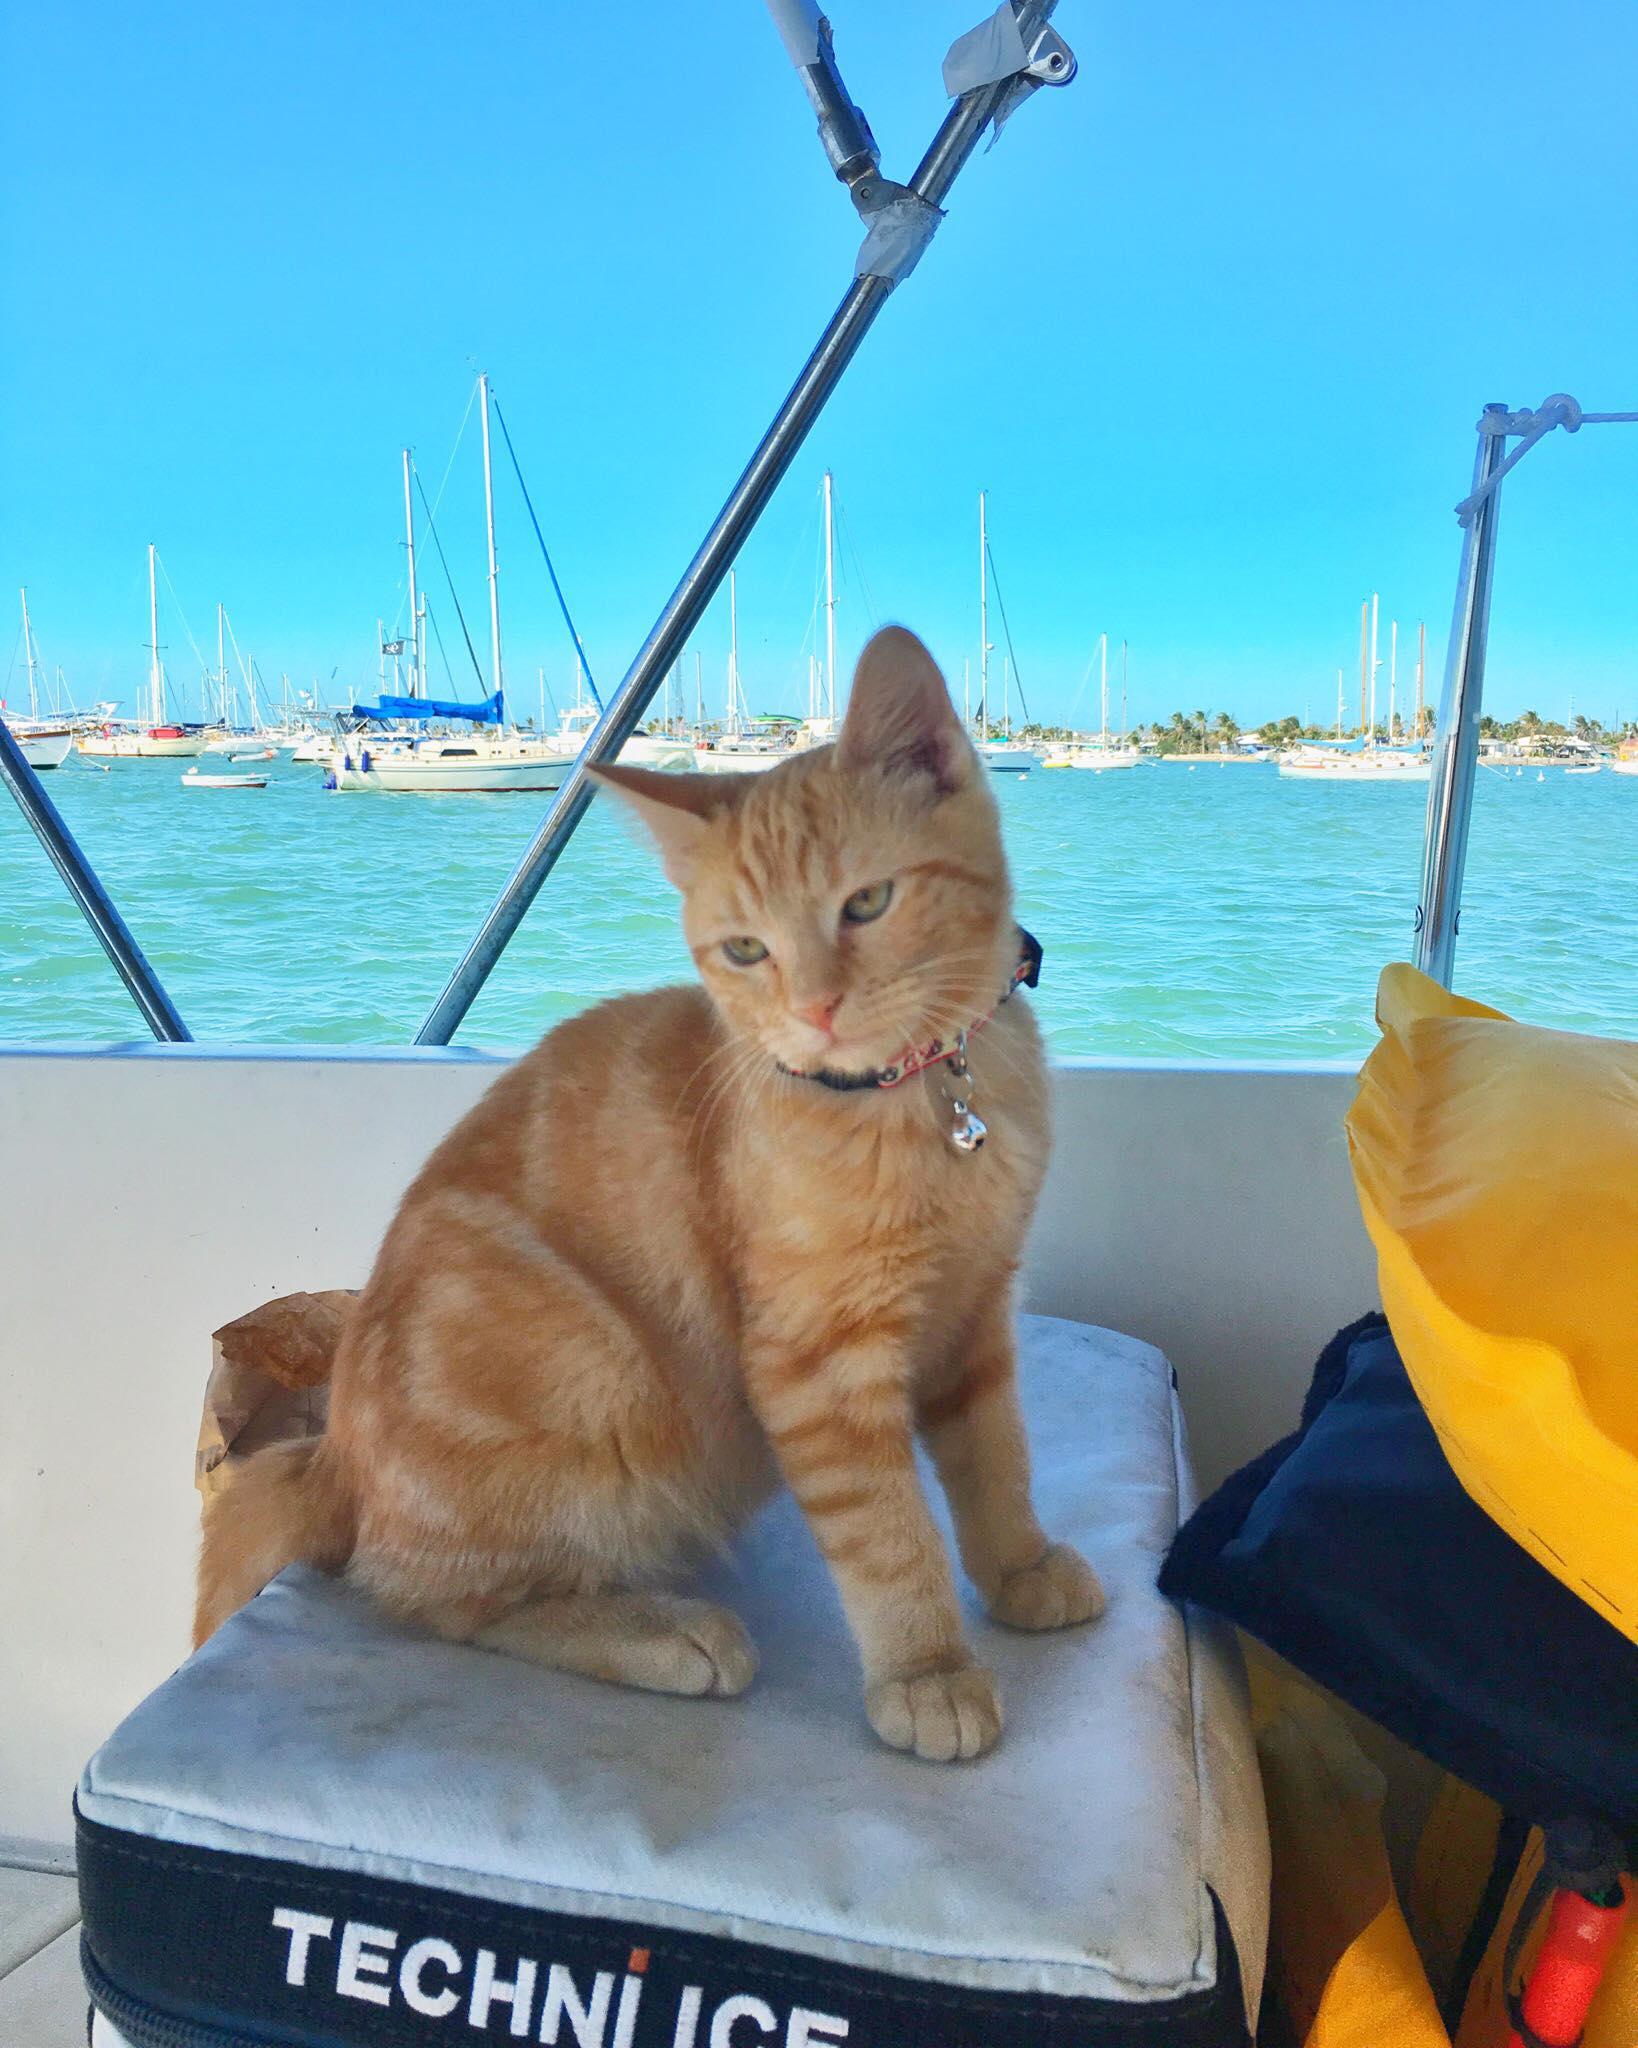 Meet Captain Ahab - Our New Sailor Cat Who Will Sail Around the World With Us